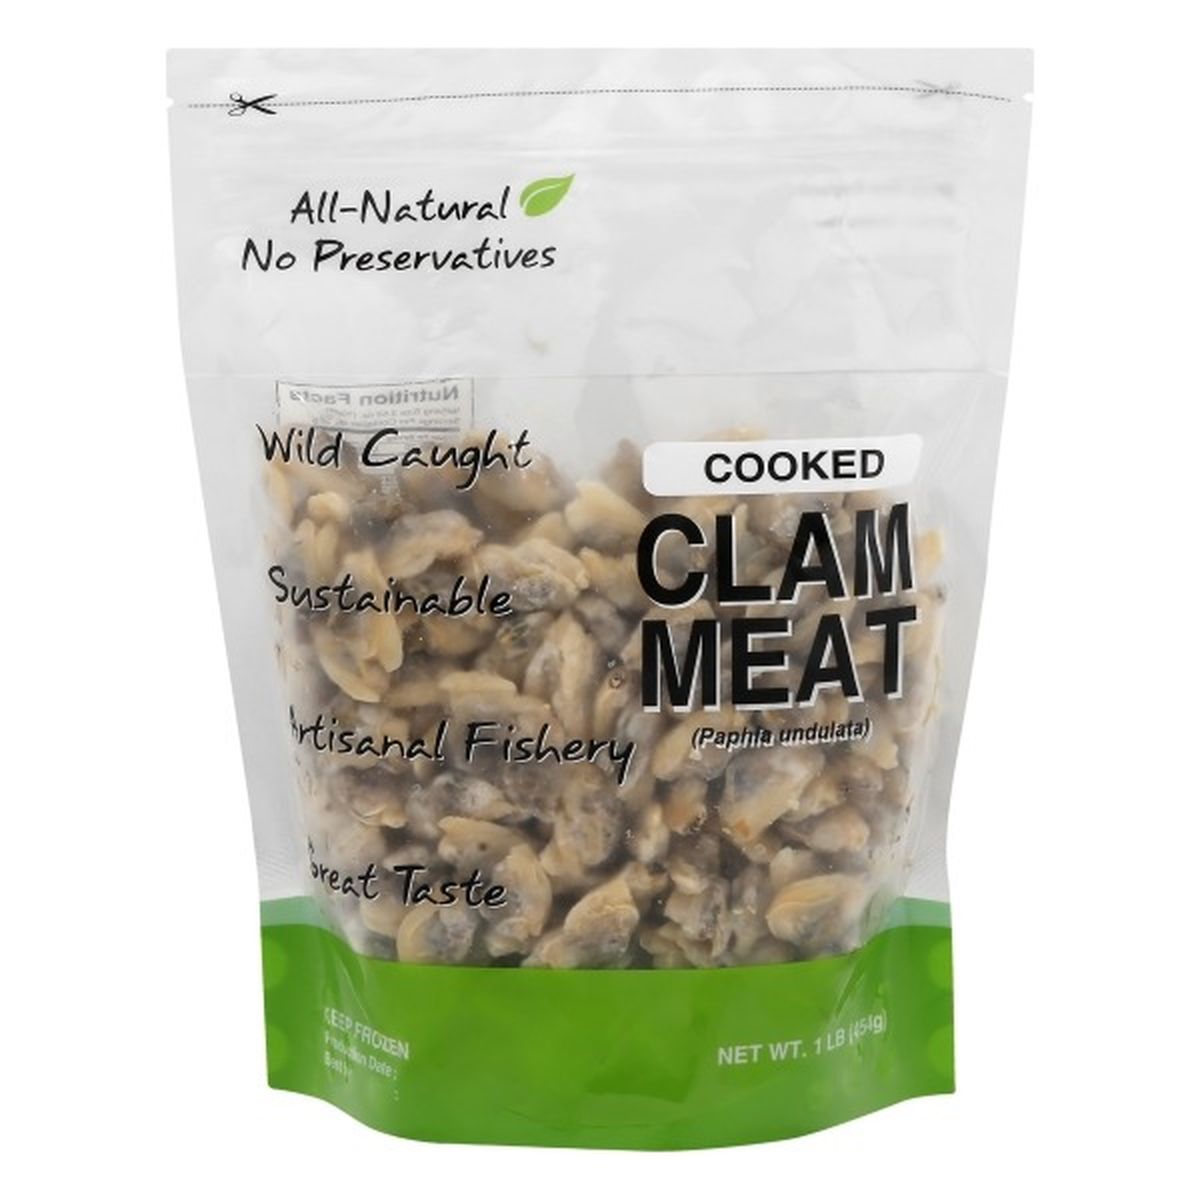 Calories in Northern Chef Clam Meat, Cooked